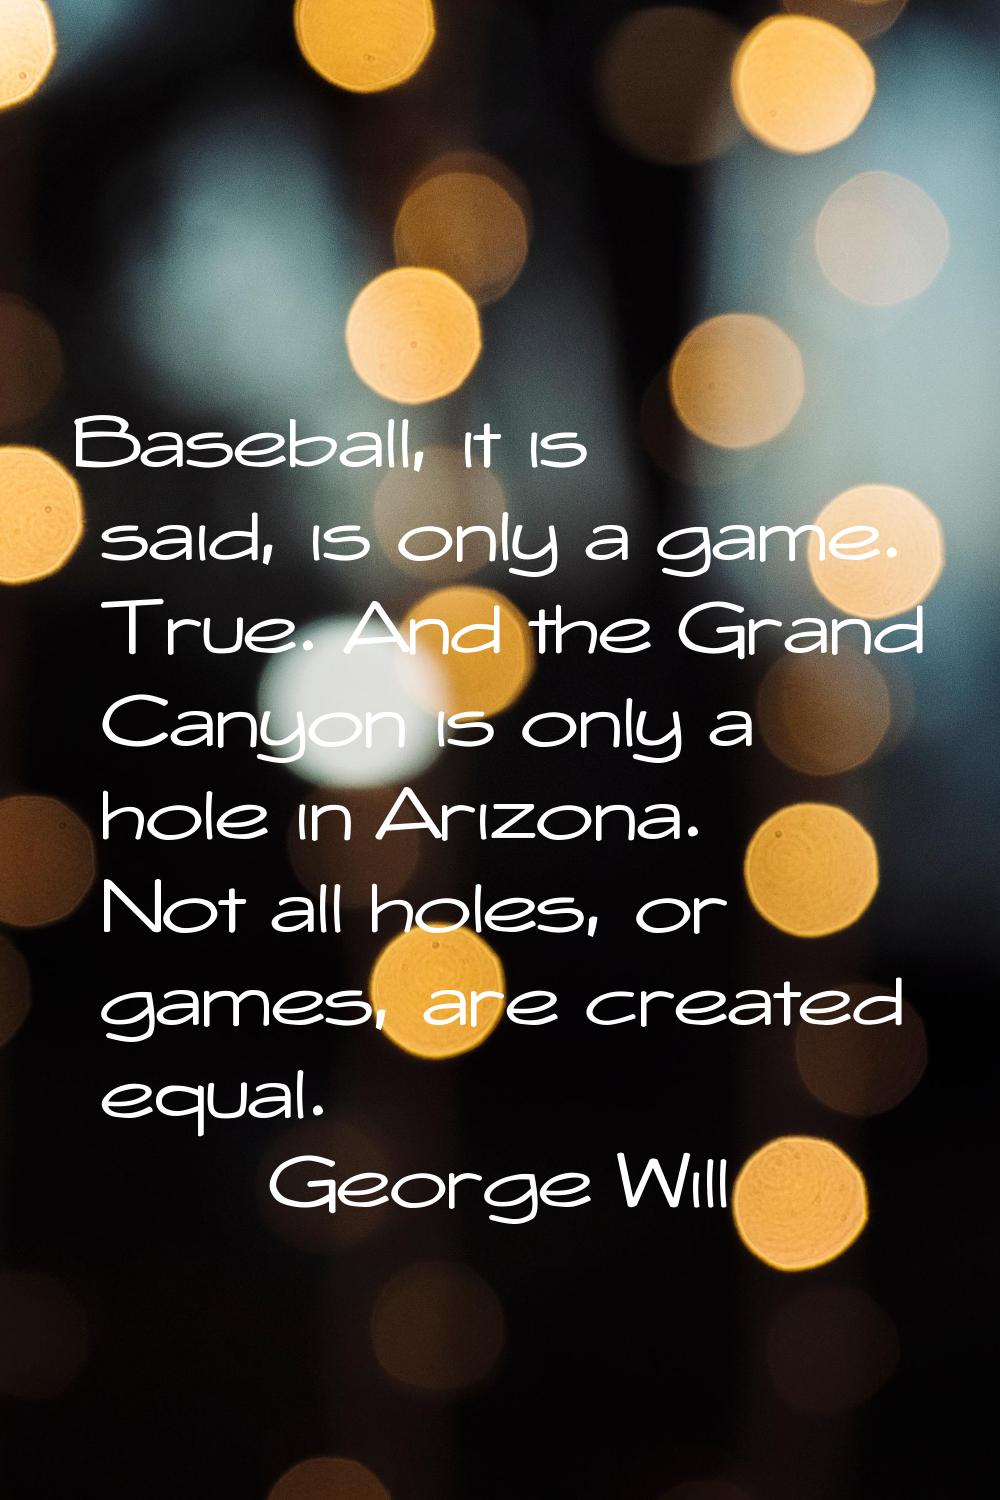 Baseball, it is said, is only a game. True. And the Grand Canyon is only a hole in Arizona. Not all